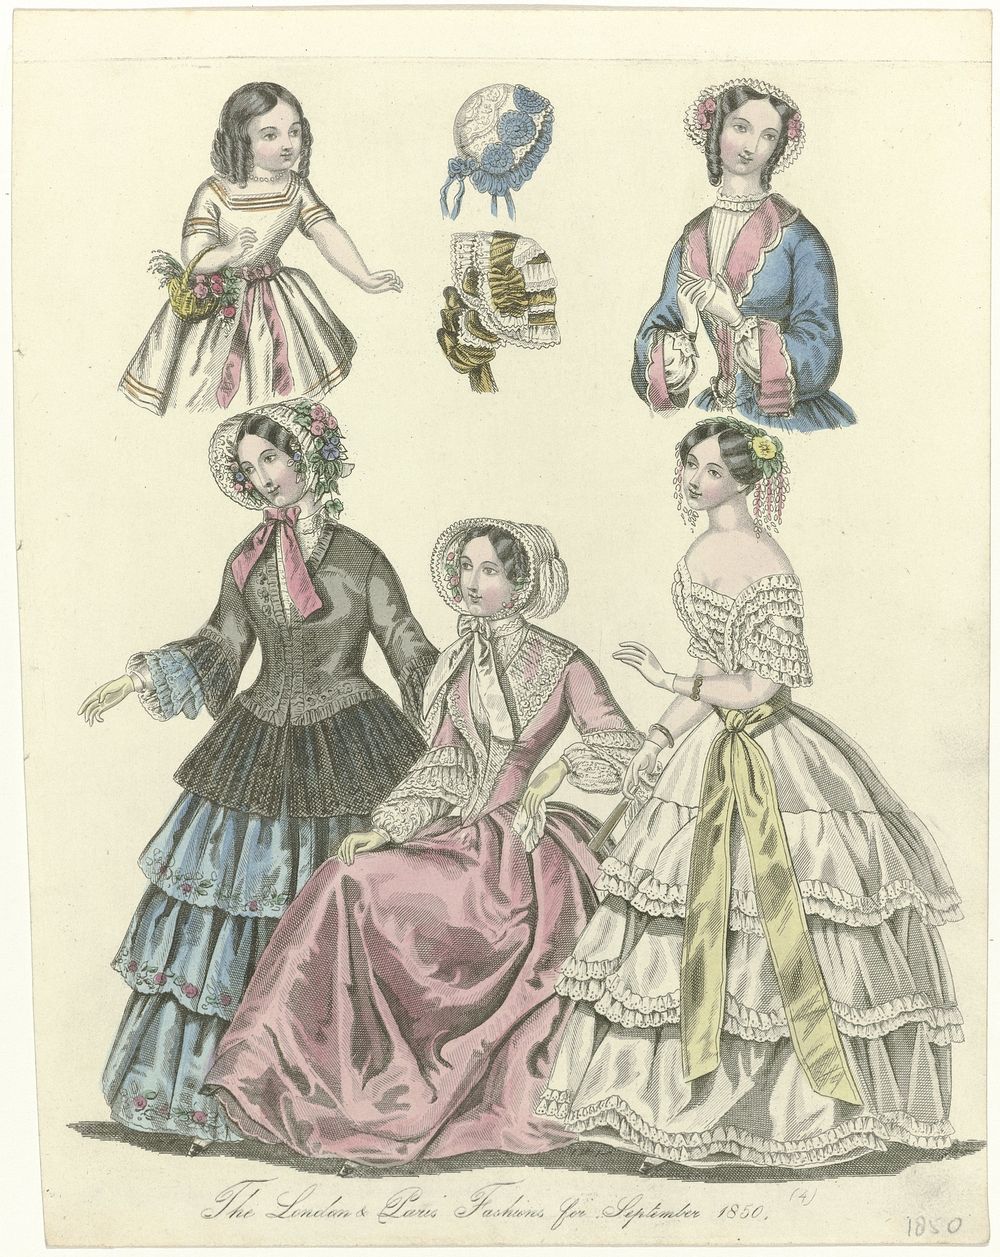 The World of Fashion, september 1850 : The London & Paris Fashions (...) (1850) by anonymous